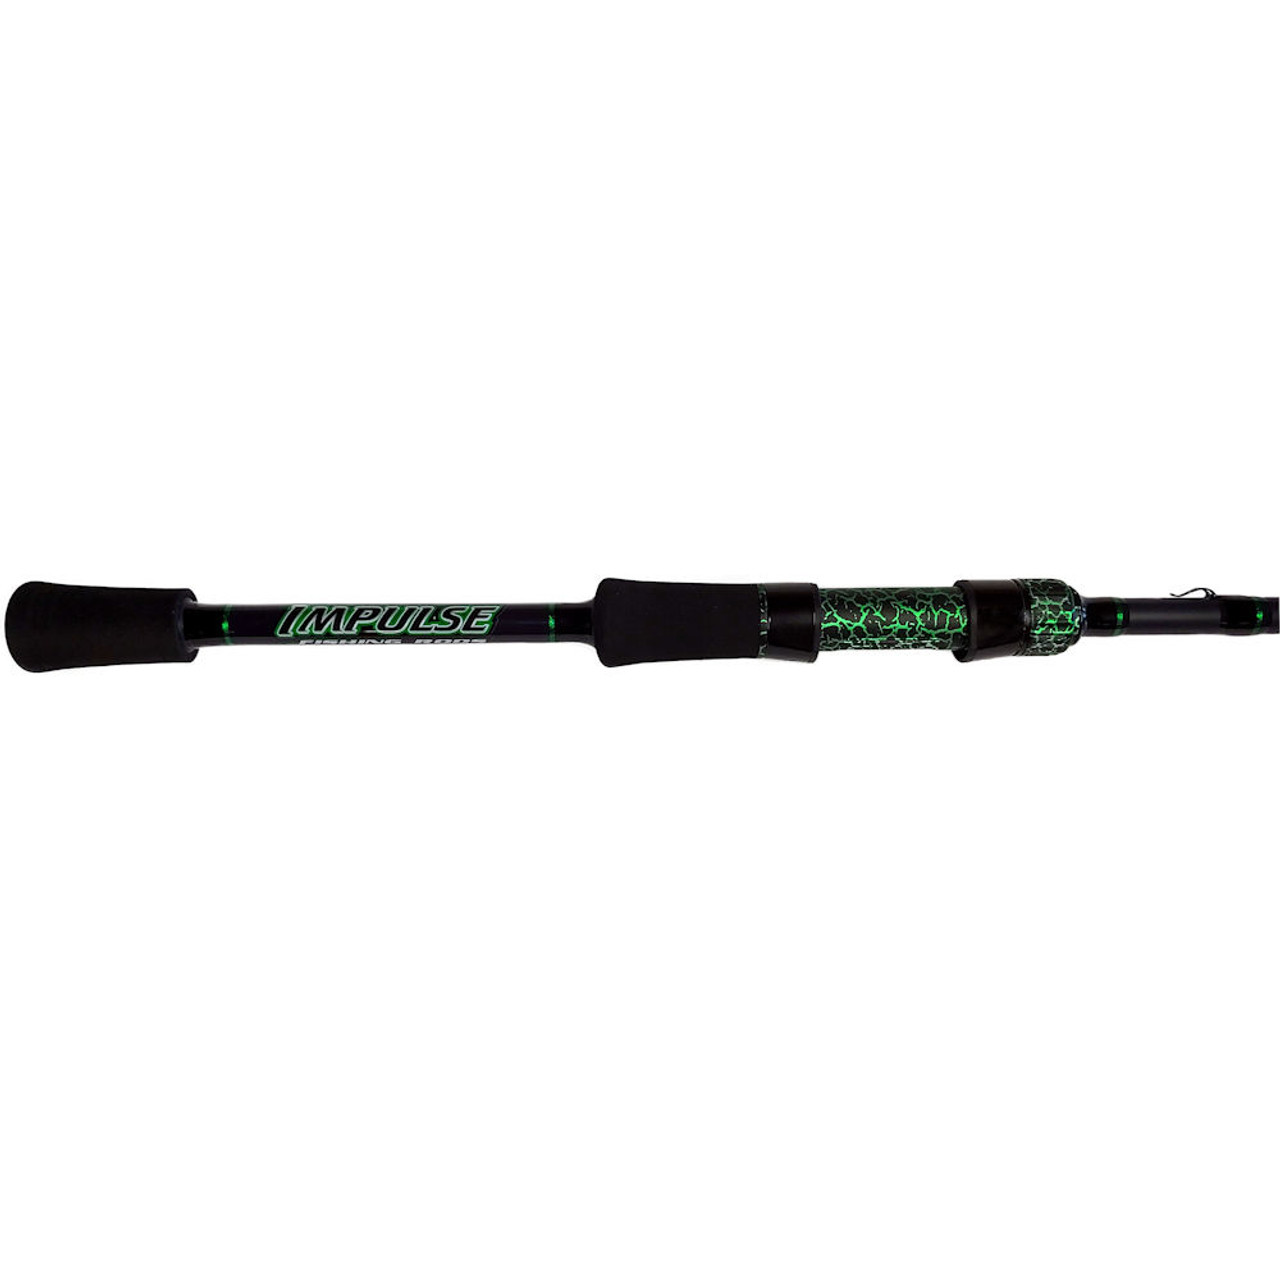 Fishing season is here, we have 7' medium heavy production rods in